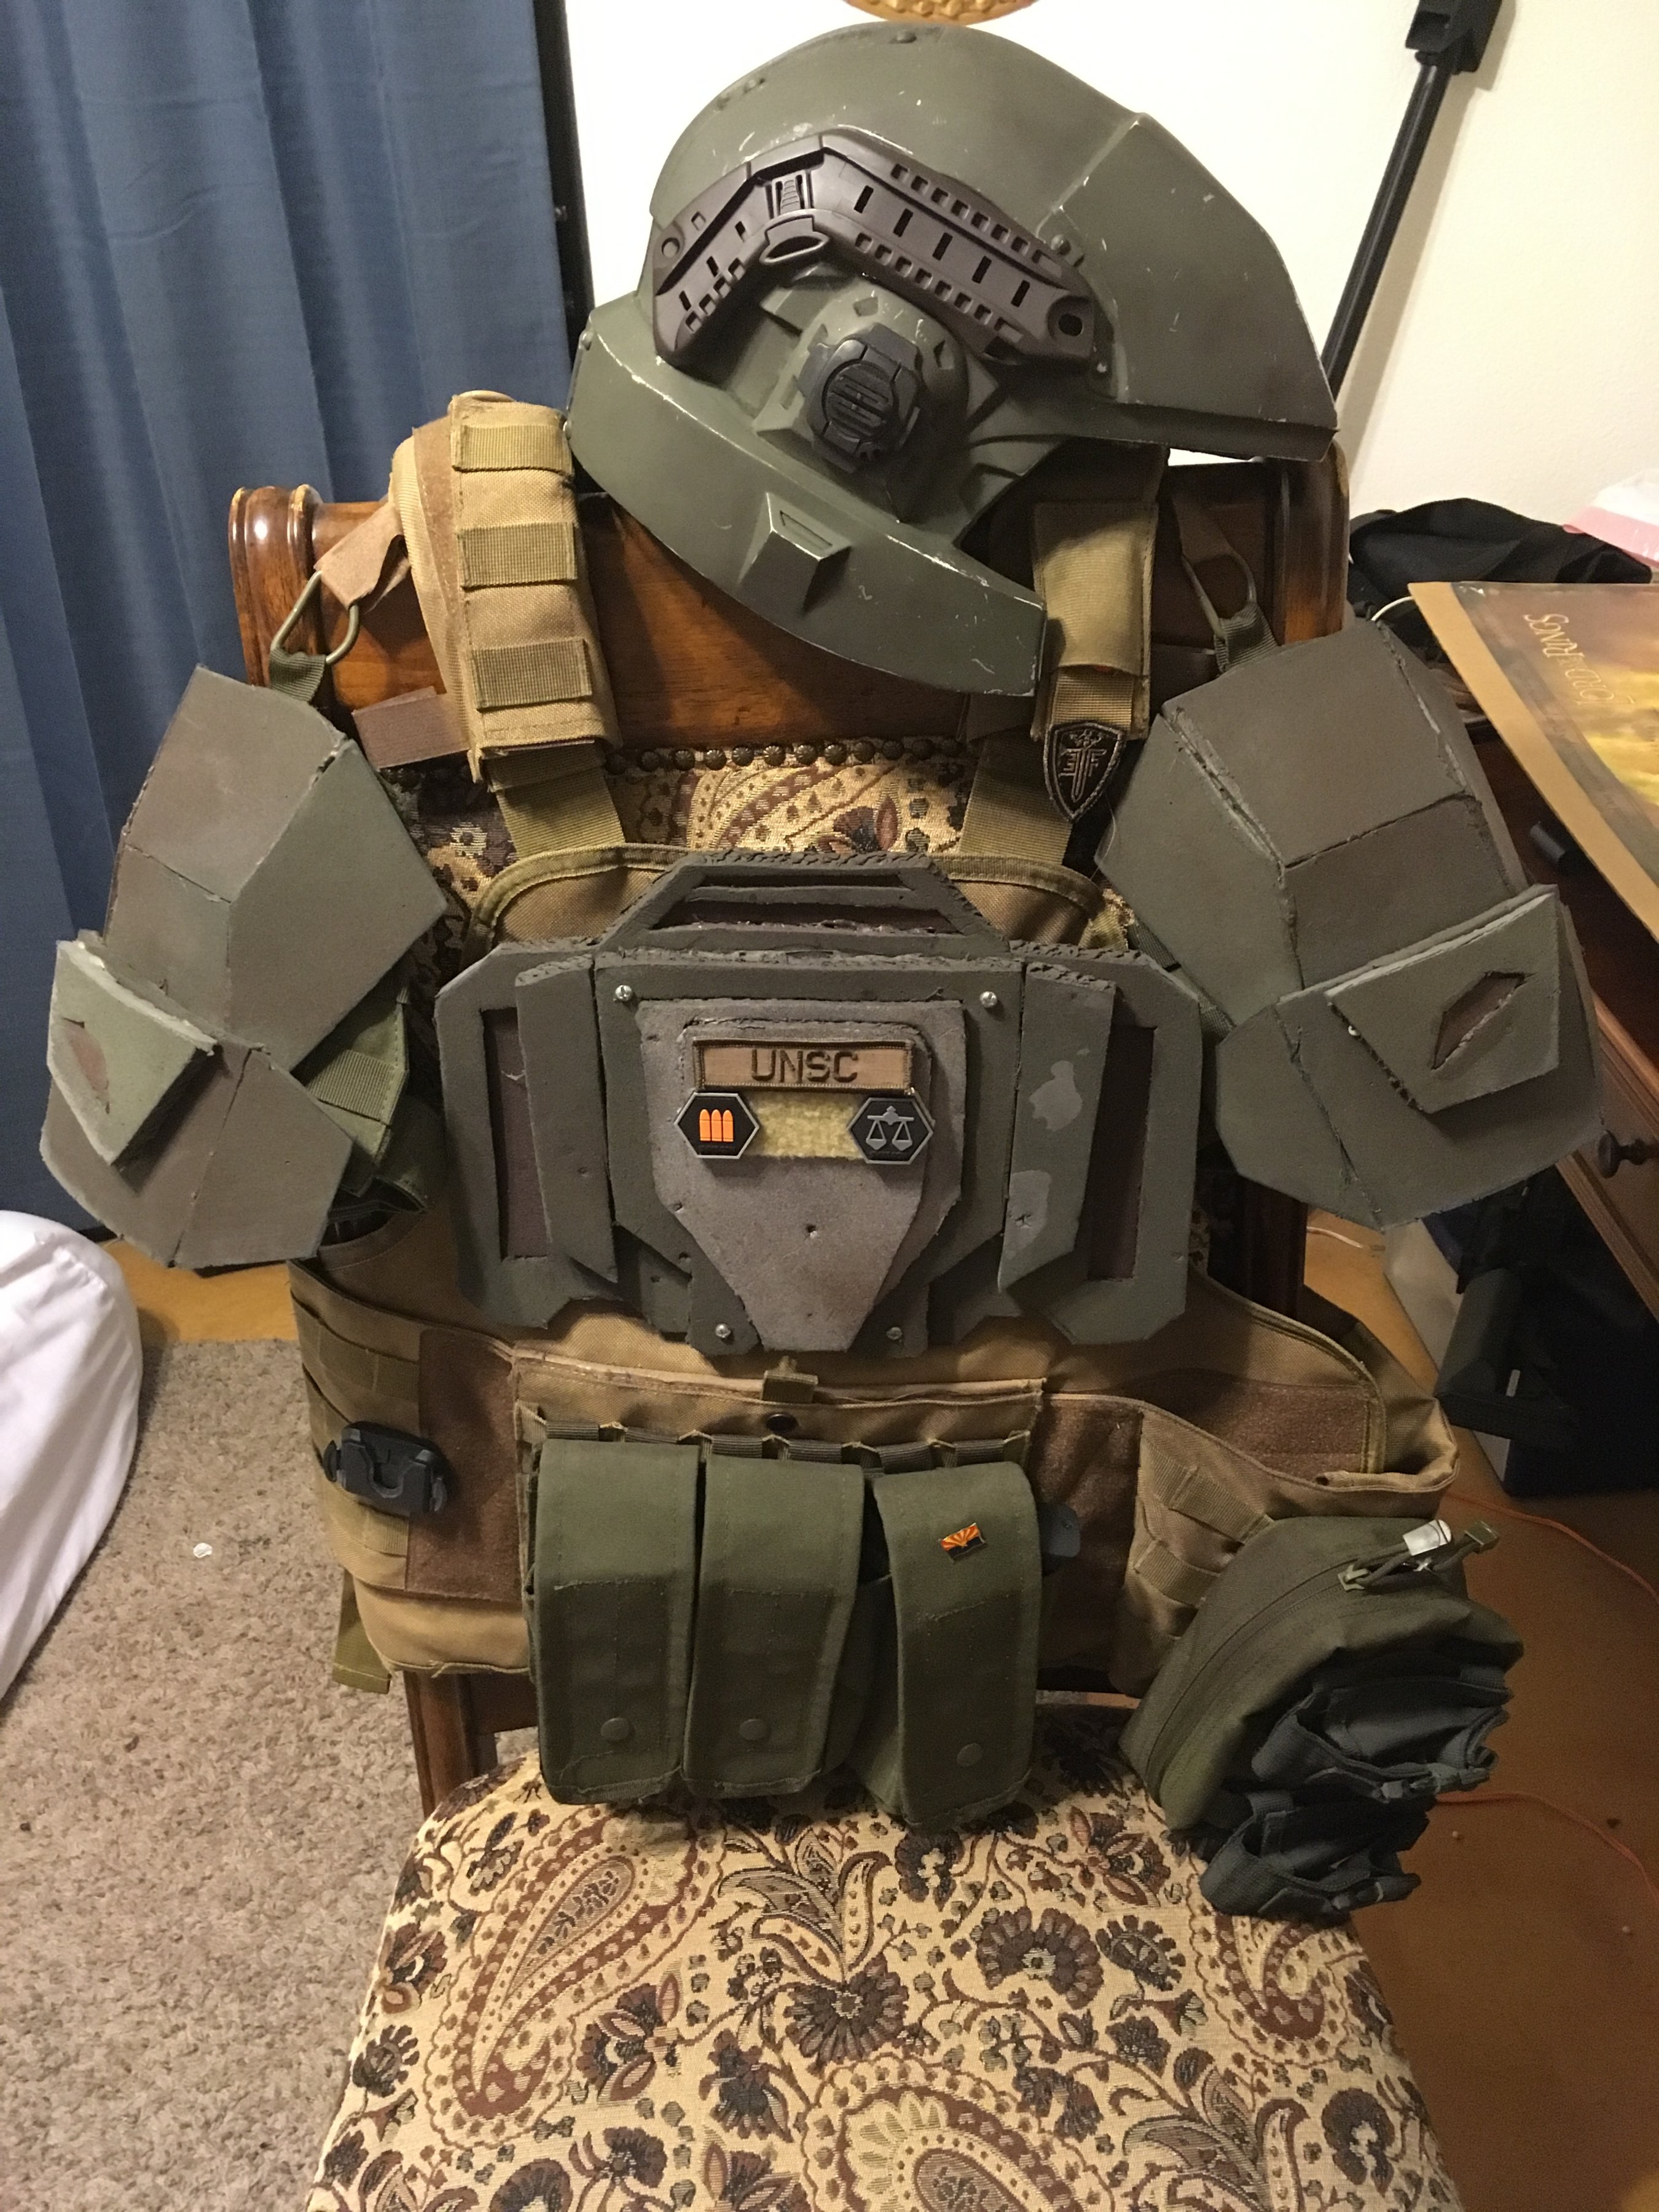 First Build. Modern-day take on the Halo 3 Marine.